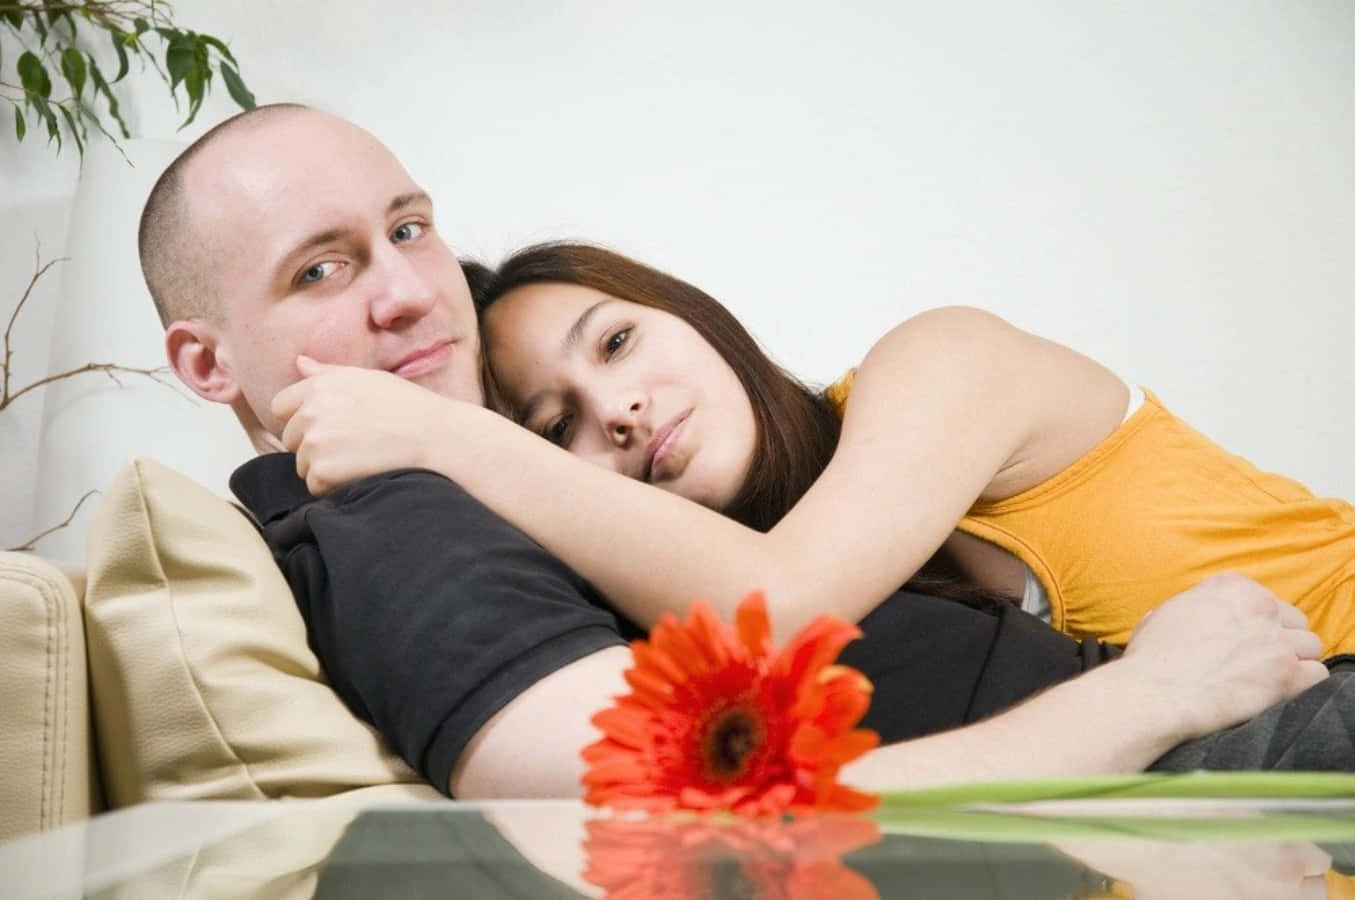 Flower Gift And Sofa Cuddling Pictures